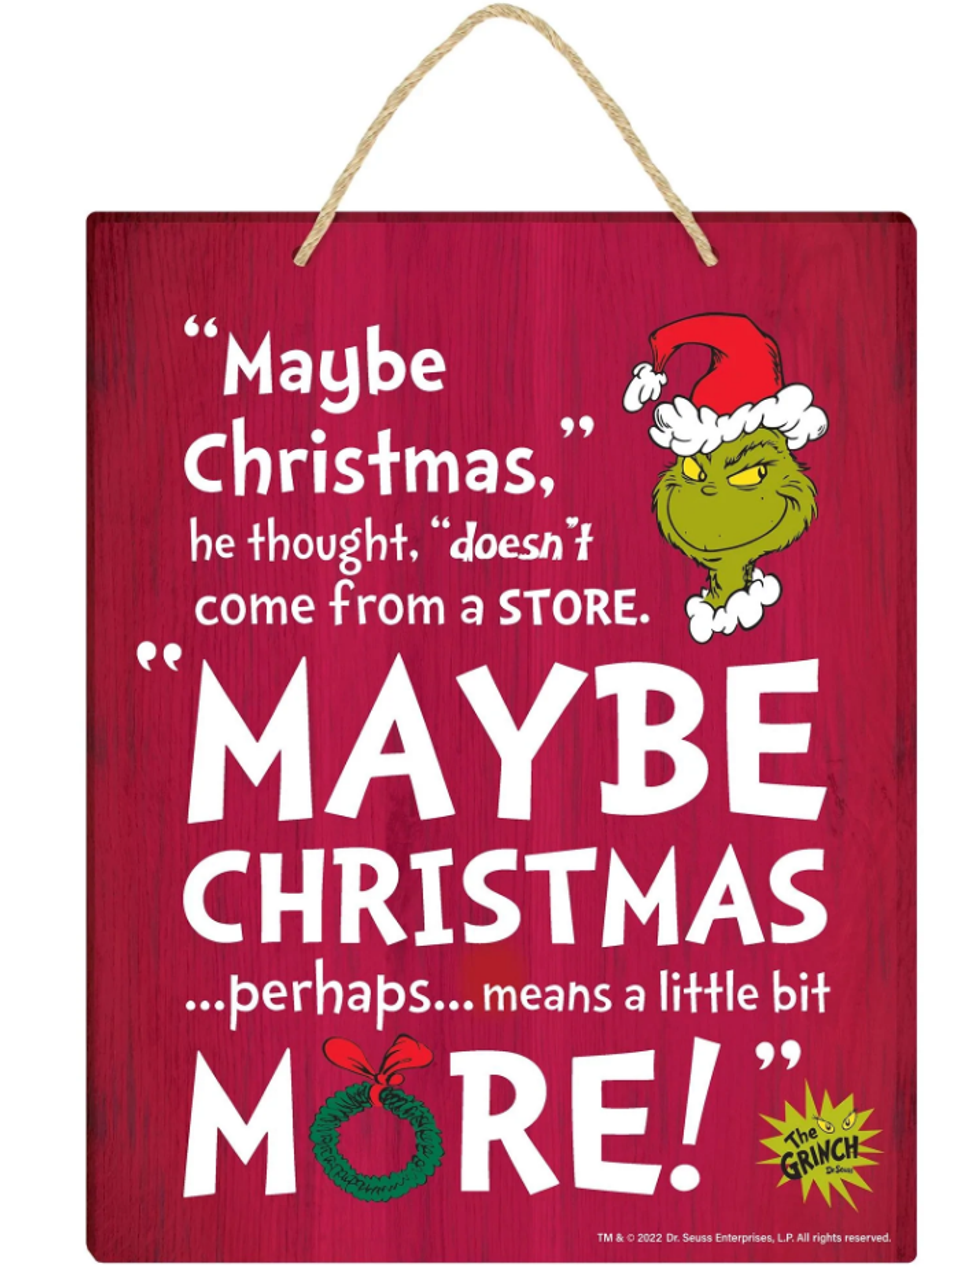 christmas grinch quotes